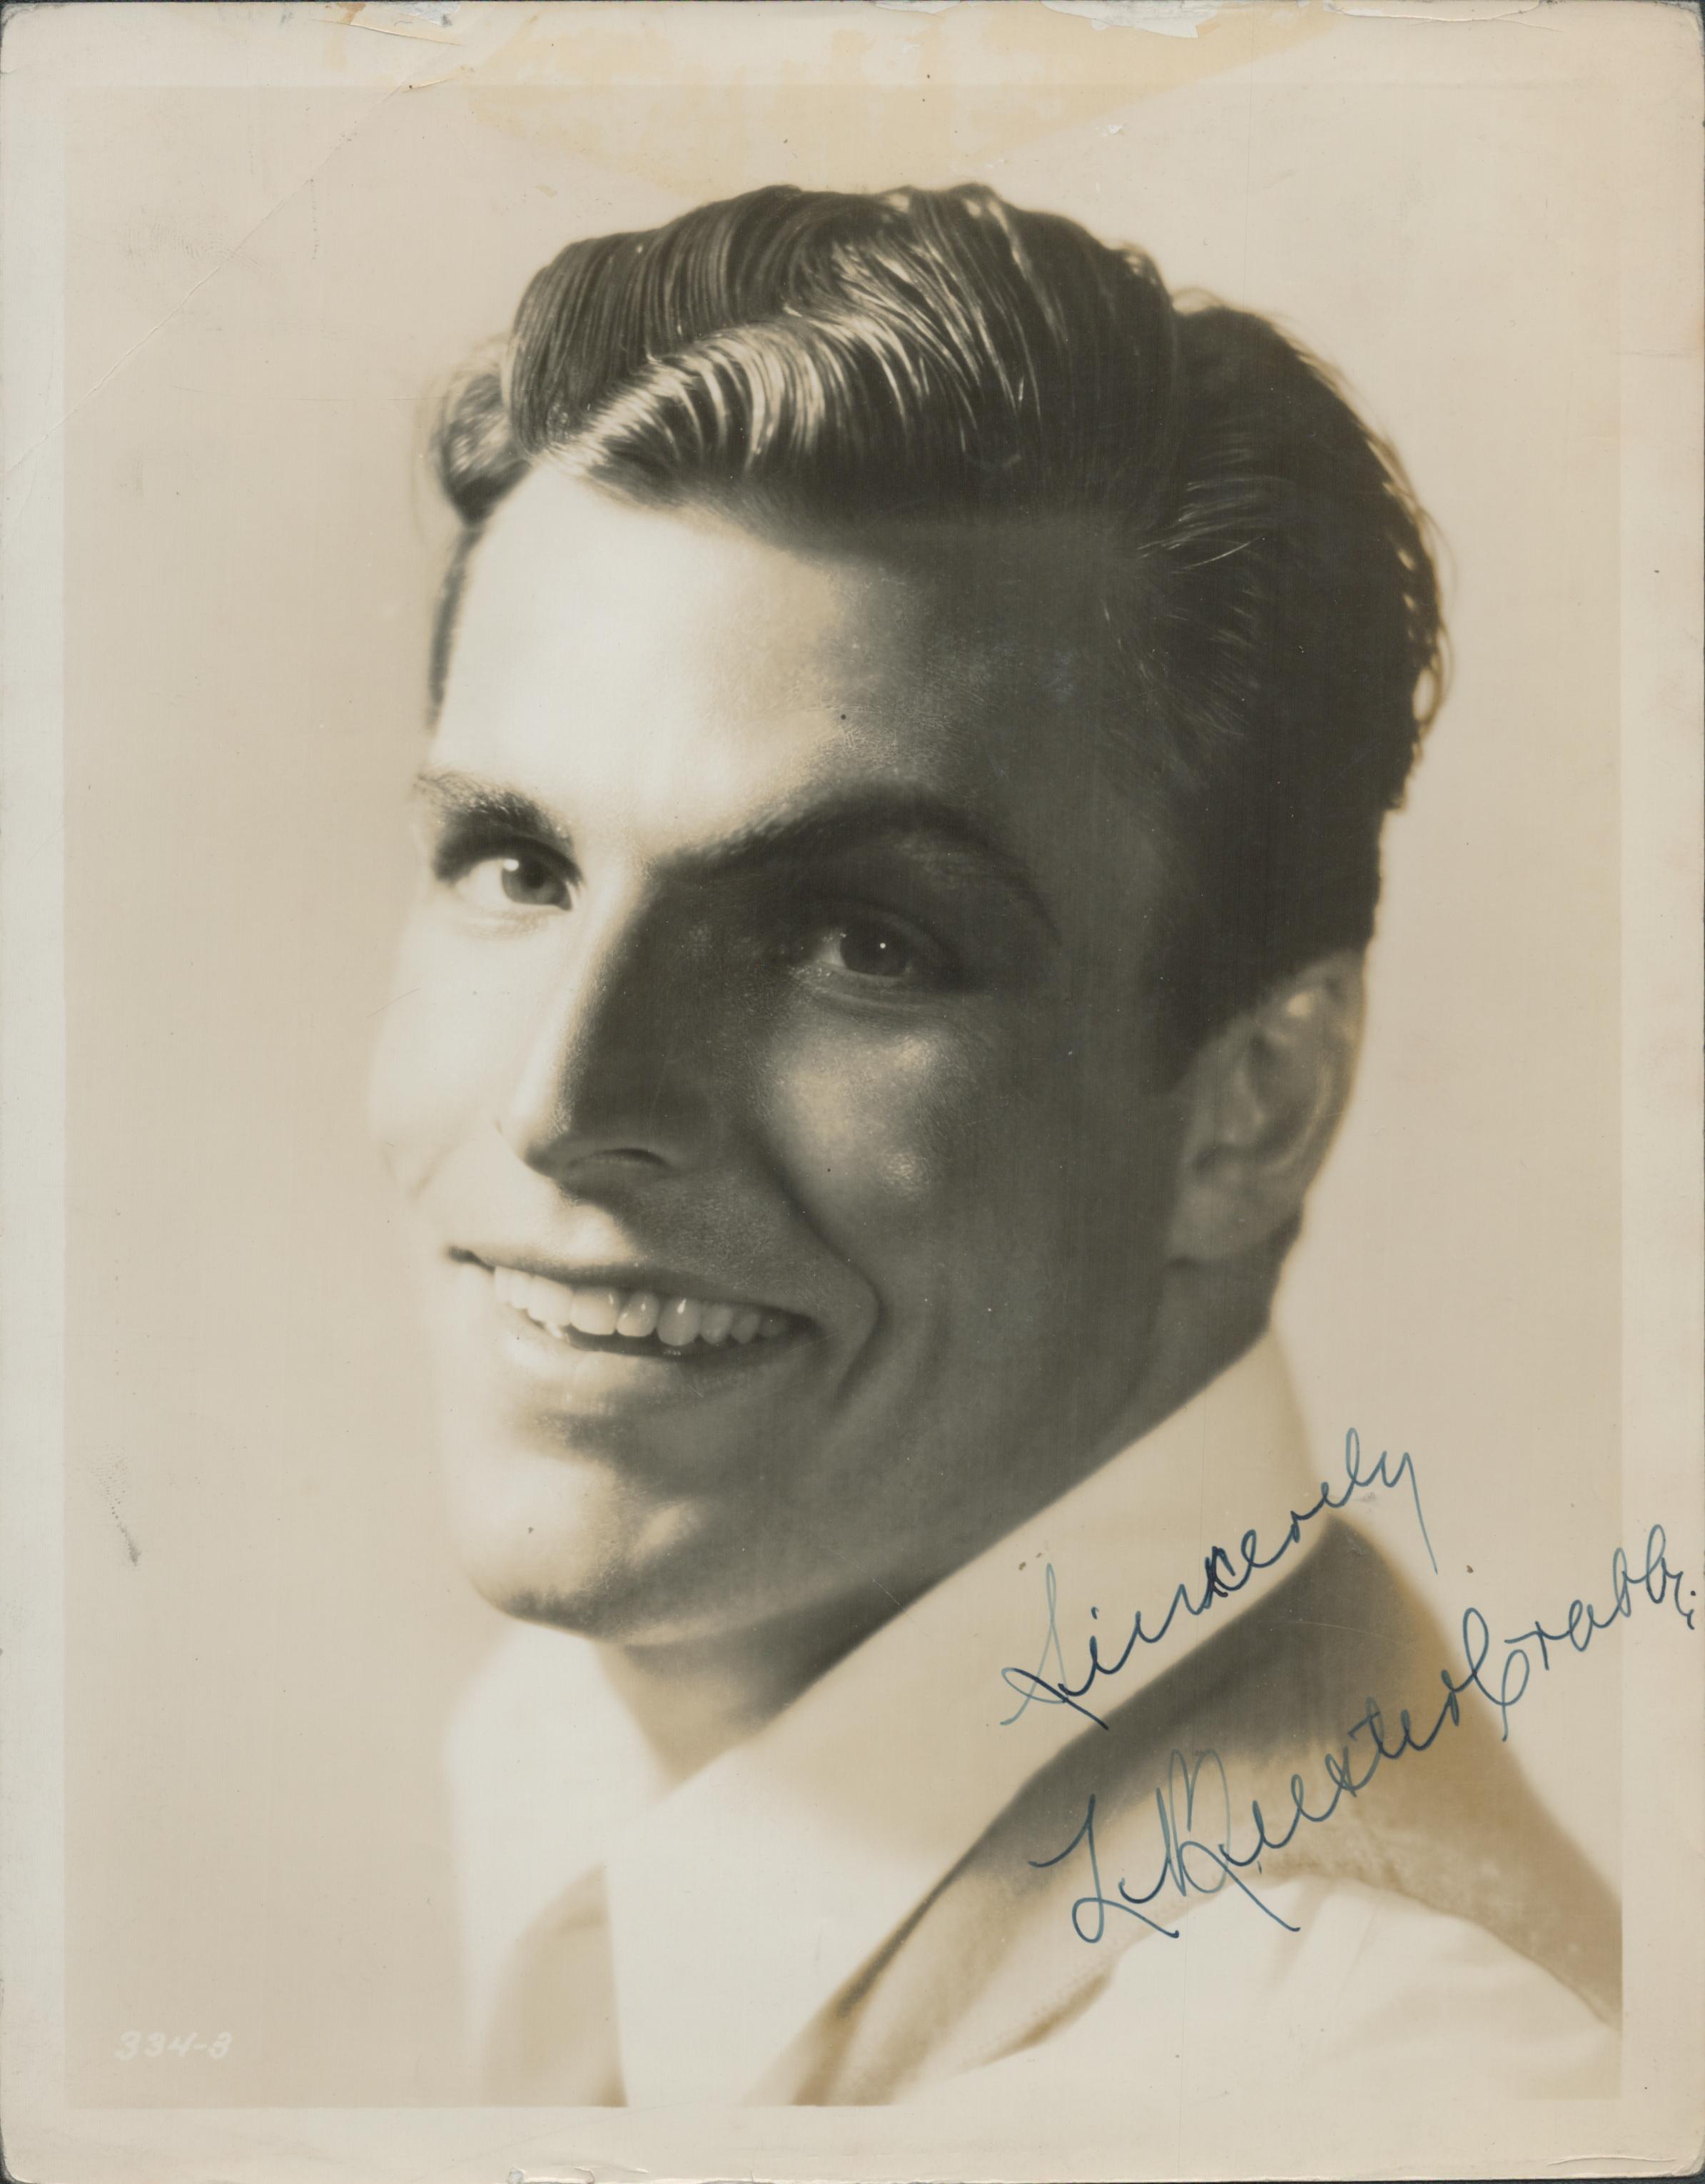 Buster Crabb signed 10x8 inch vintage sepia photo. Good Condition. All autographs come with a